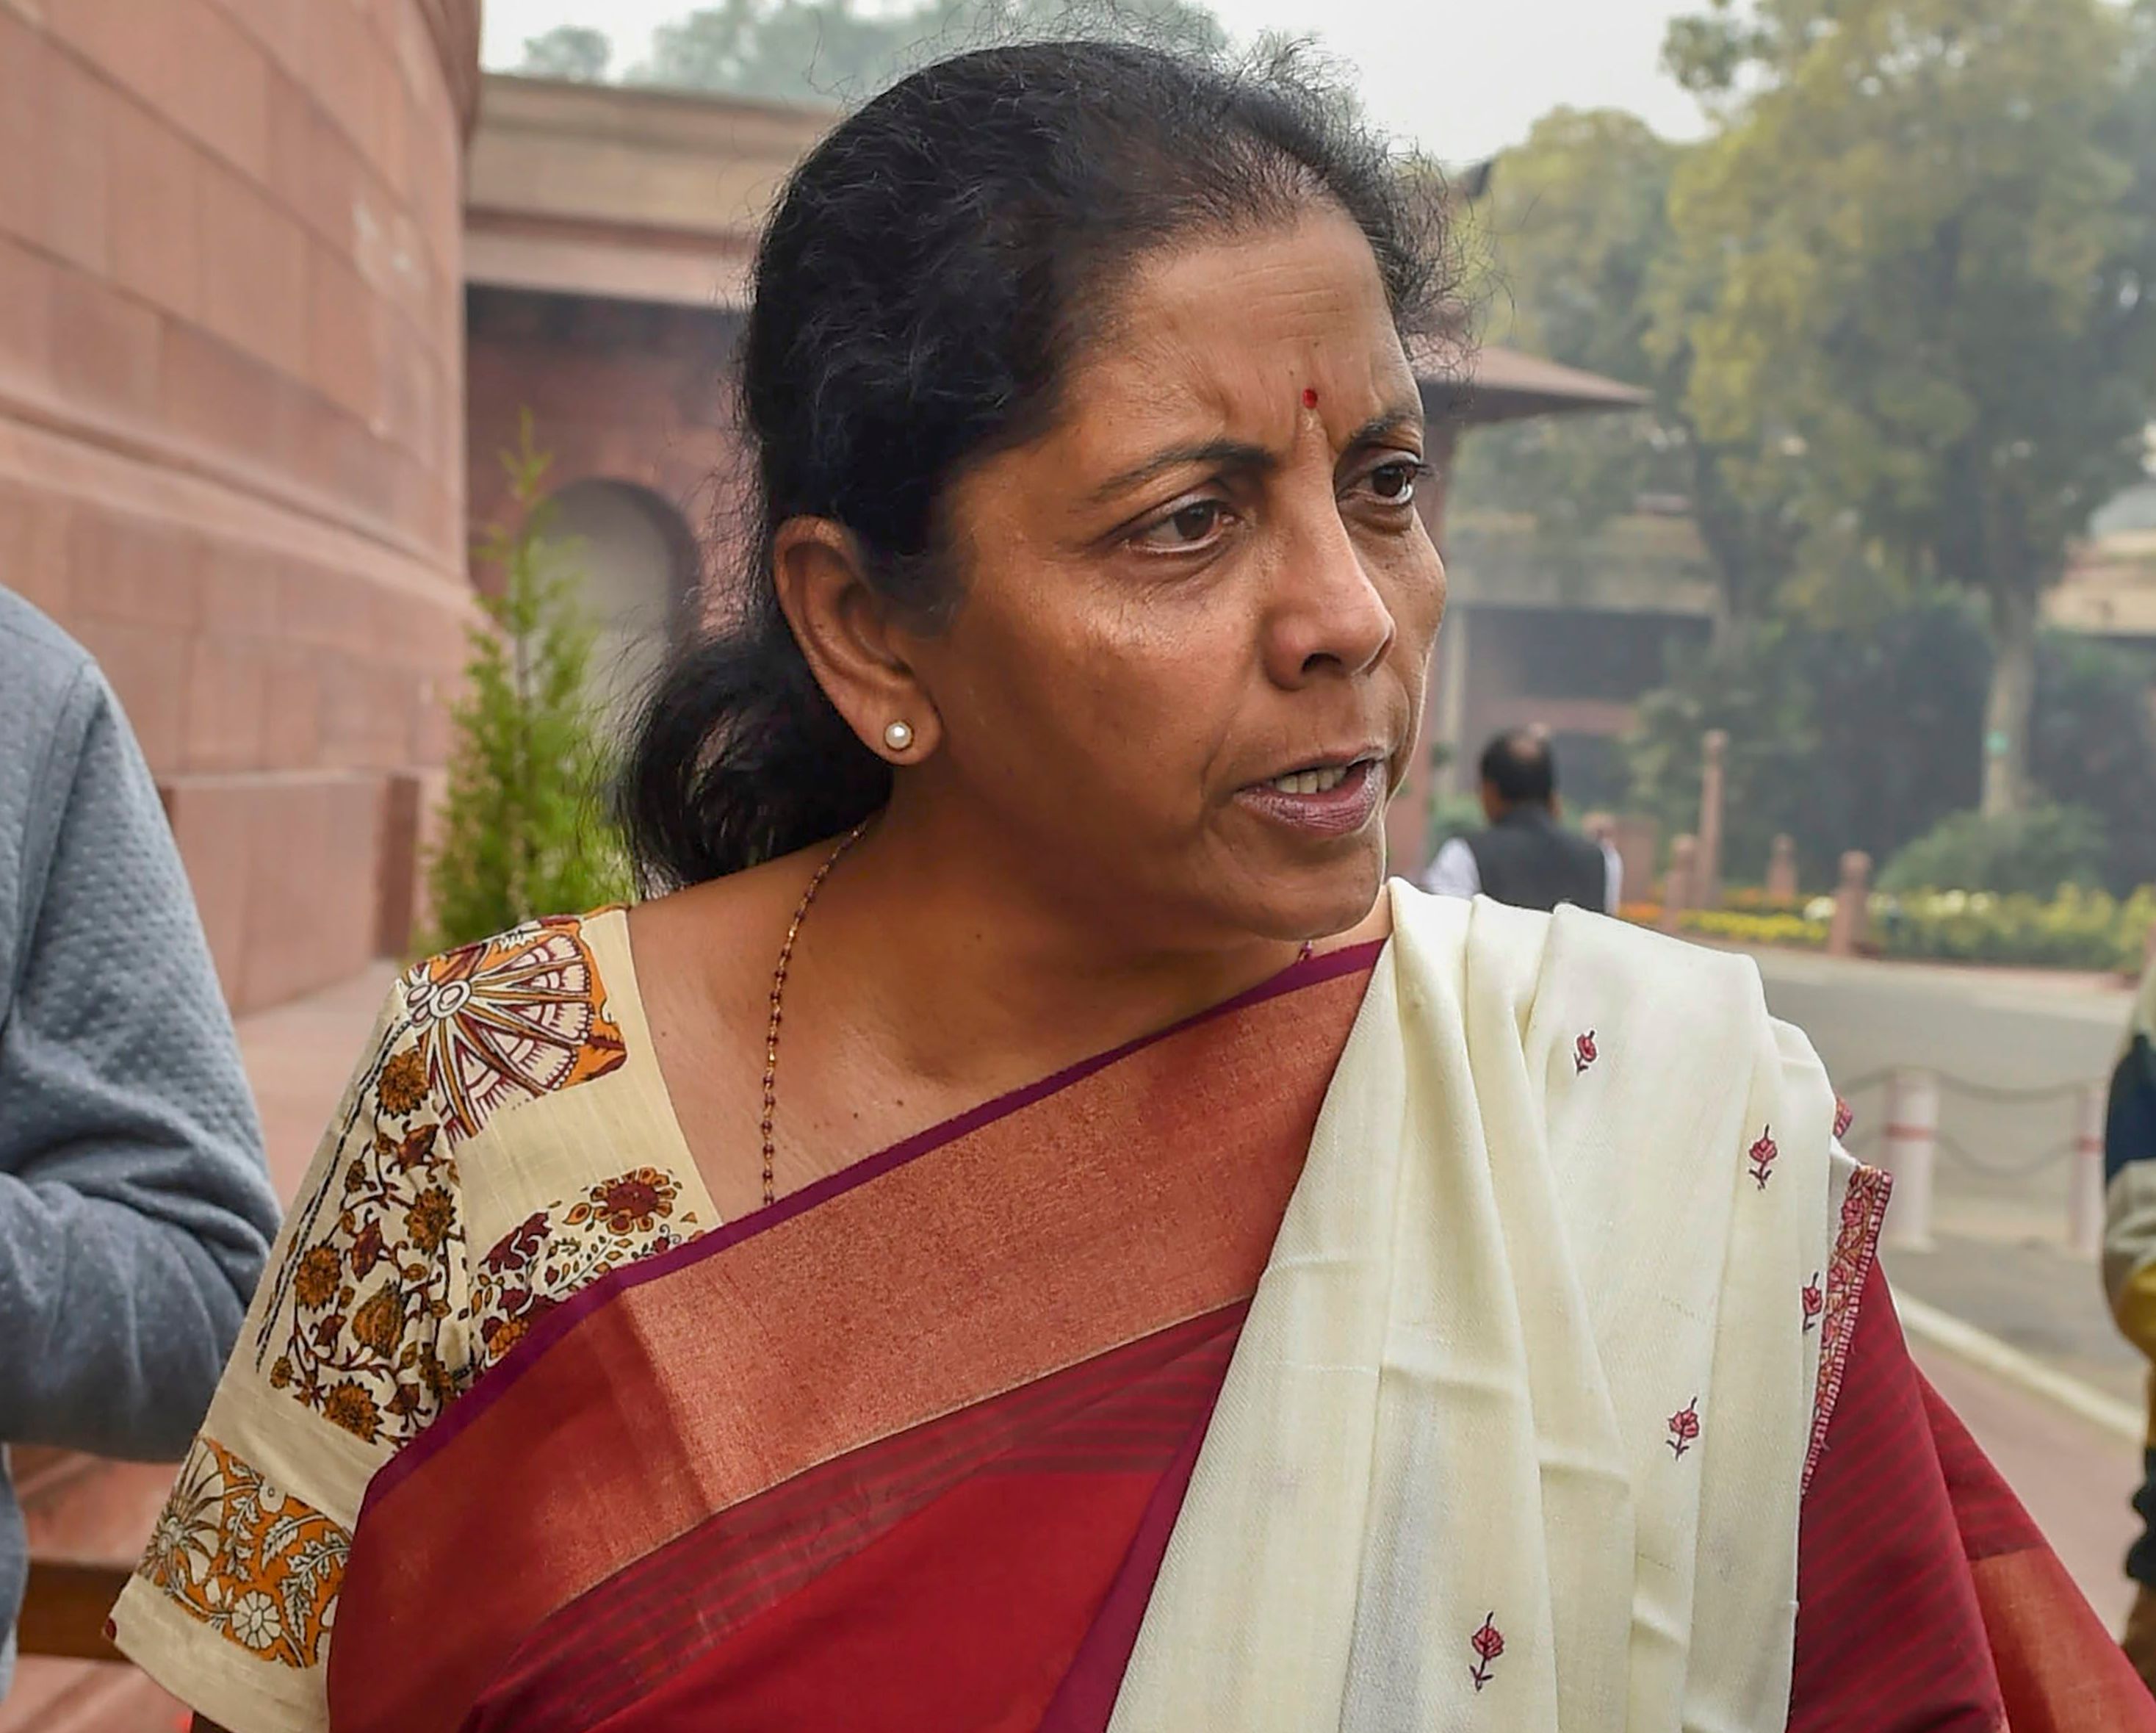 Fnance minister Nirmala Sitharaman says the Centre would lose revenues of Rs 1.45 trillion as a result of the corporate tax cut. This sounds overblown since many companies paid an effective tax rate of lower than 25 per cent anyway